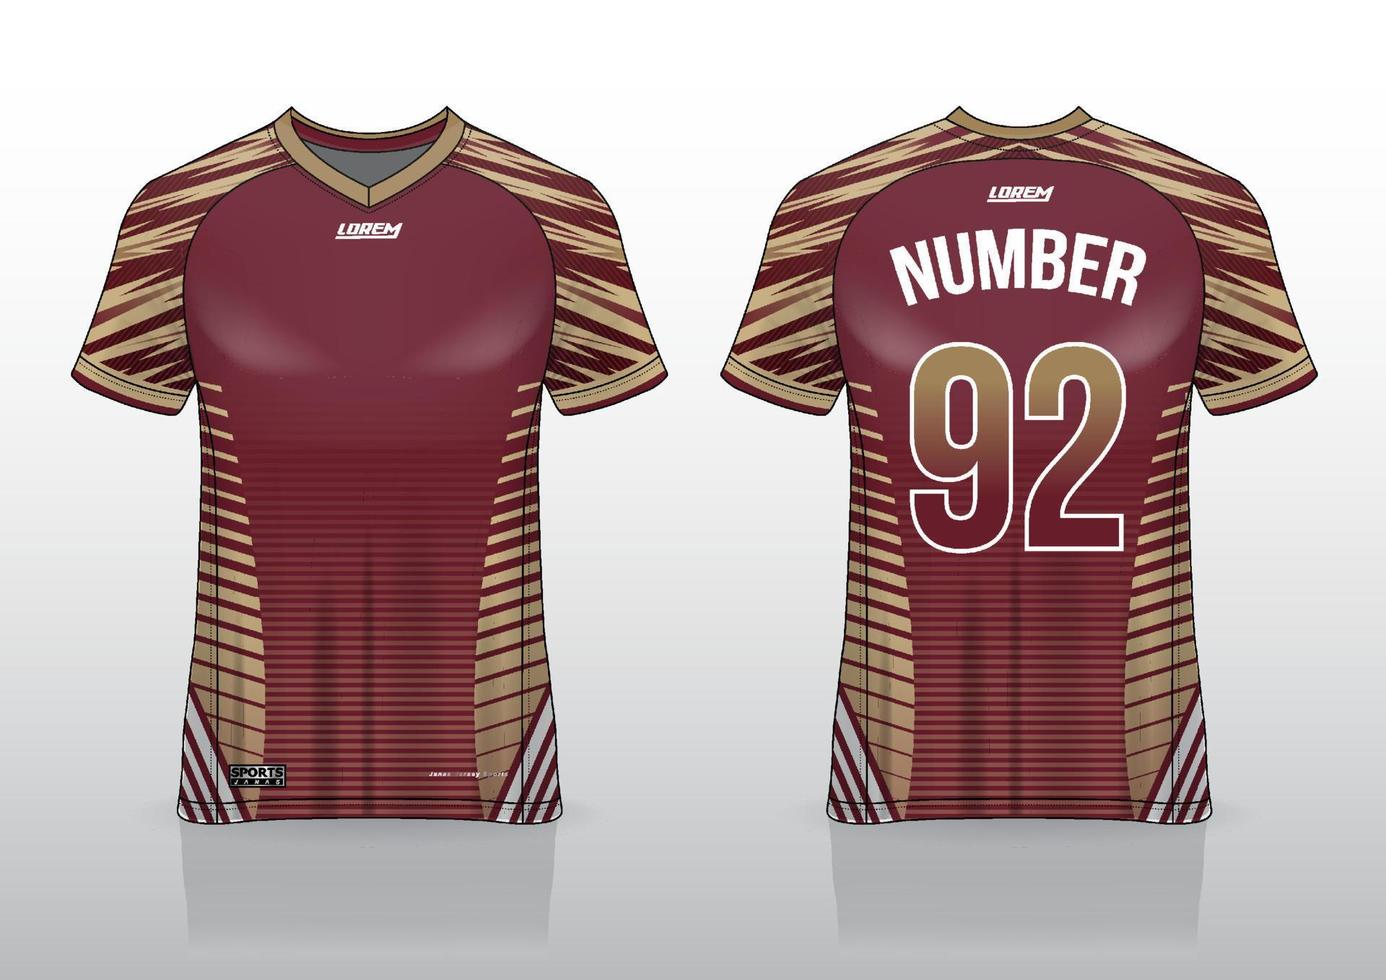 soccer jersey design for outdoor sports vector